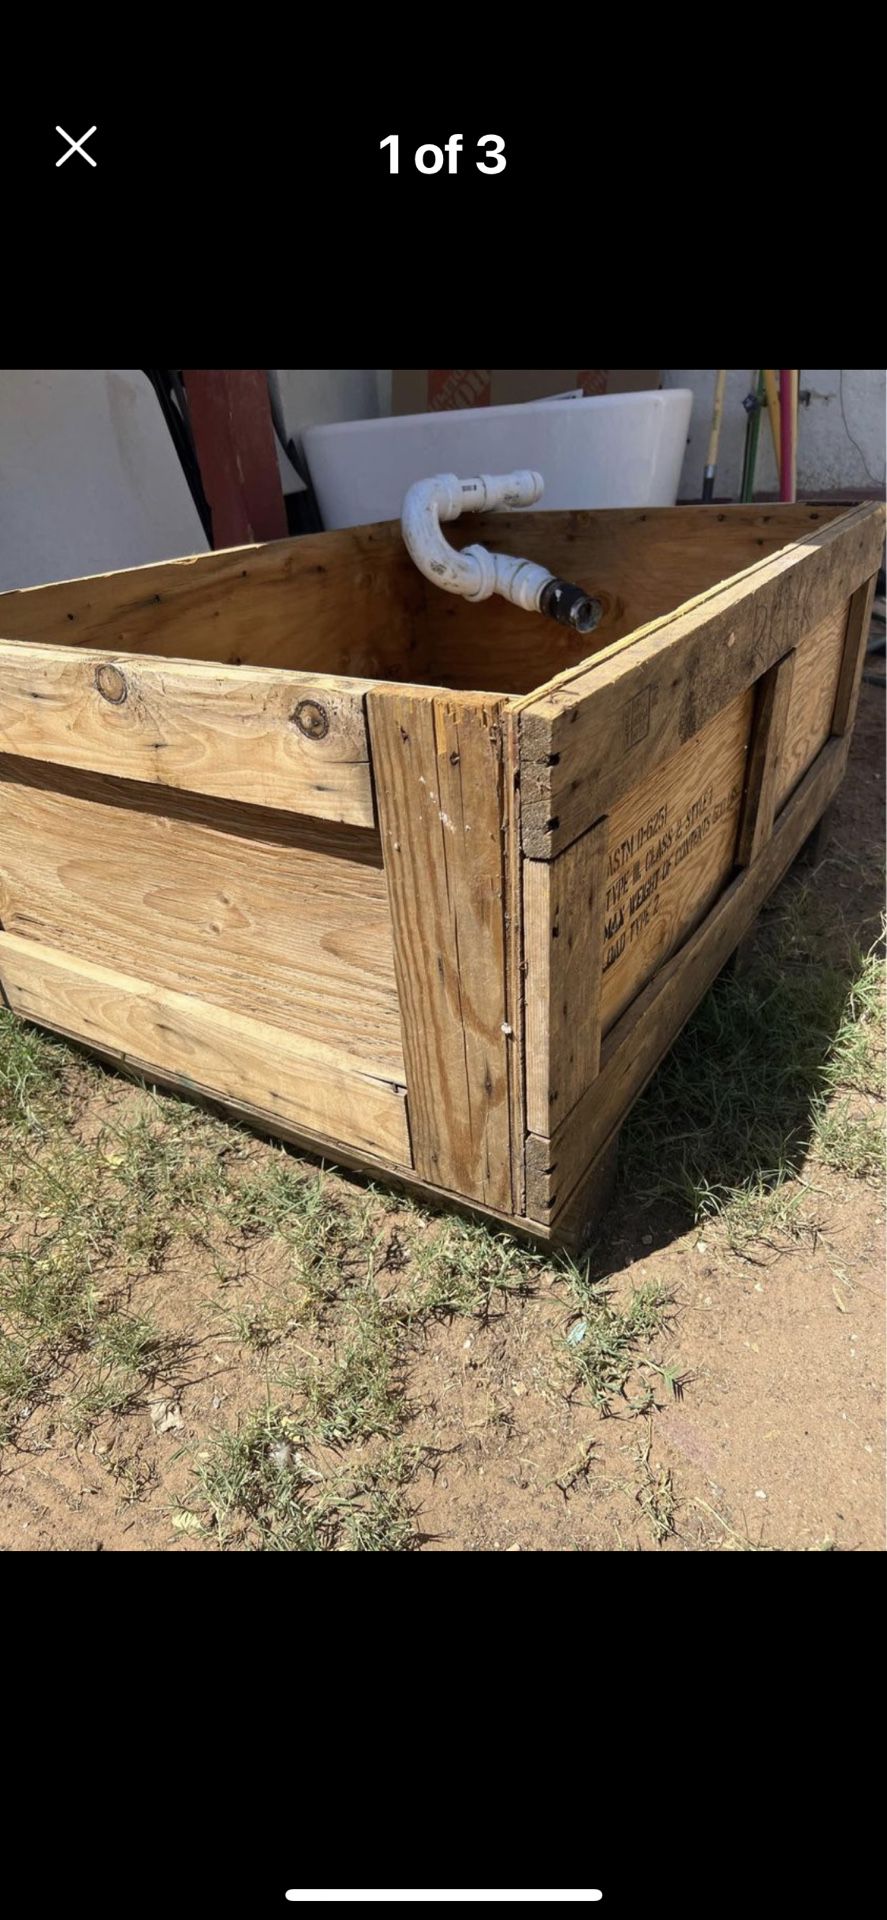 SELLING  EXTRA LARGE  SOLID WOOD PLANTERS  each $100.   EACH FIRM  $100. EACH SQUARE PLANTERS $100. each ! firm cash only by Yarbrough      PLANTER BO